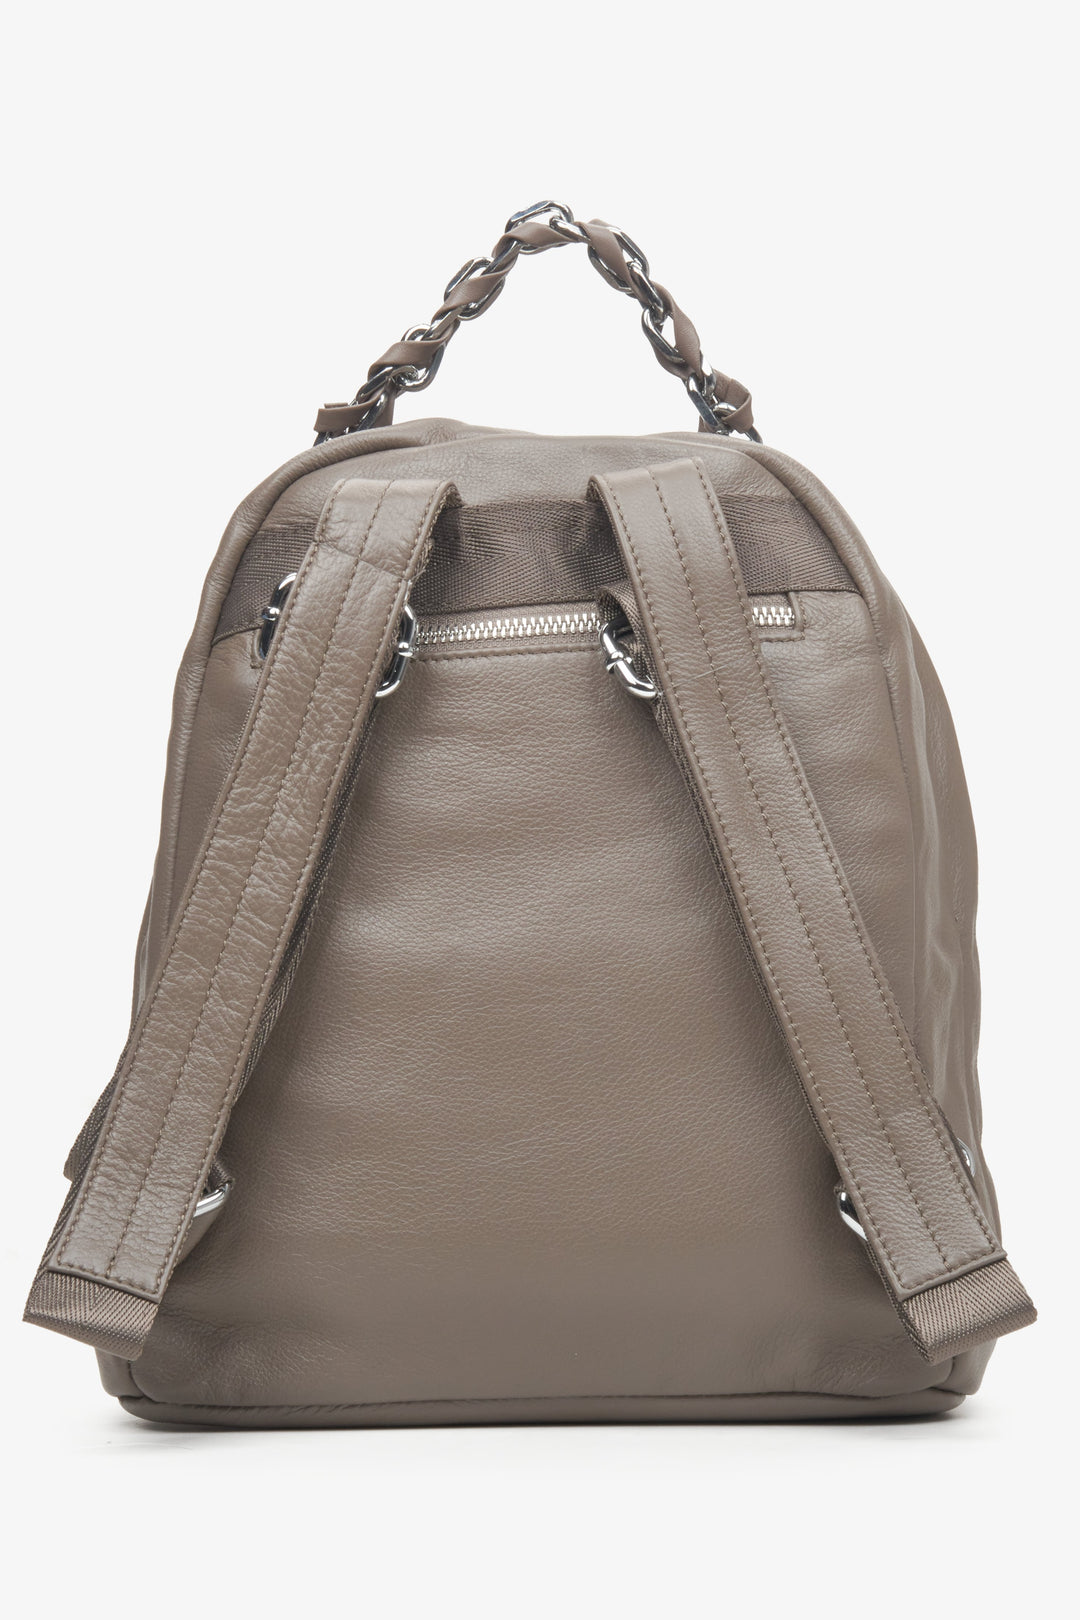 Estro's women's grey and brown leather backpack - close-up of the back and model's shoulders.